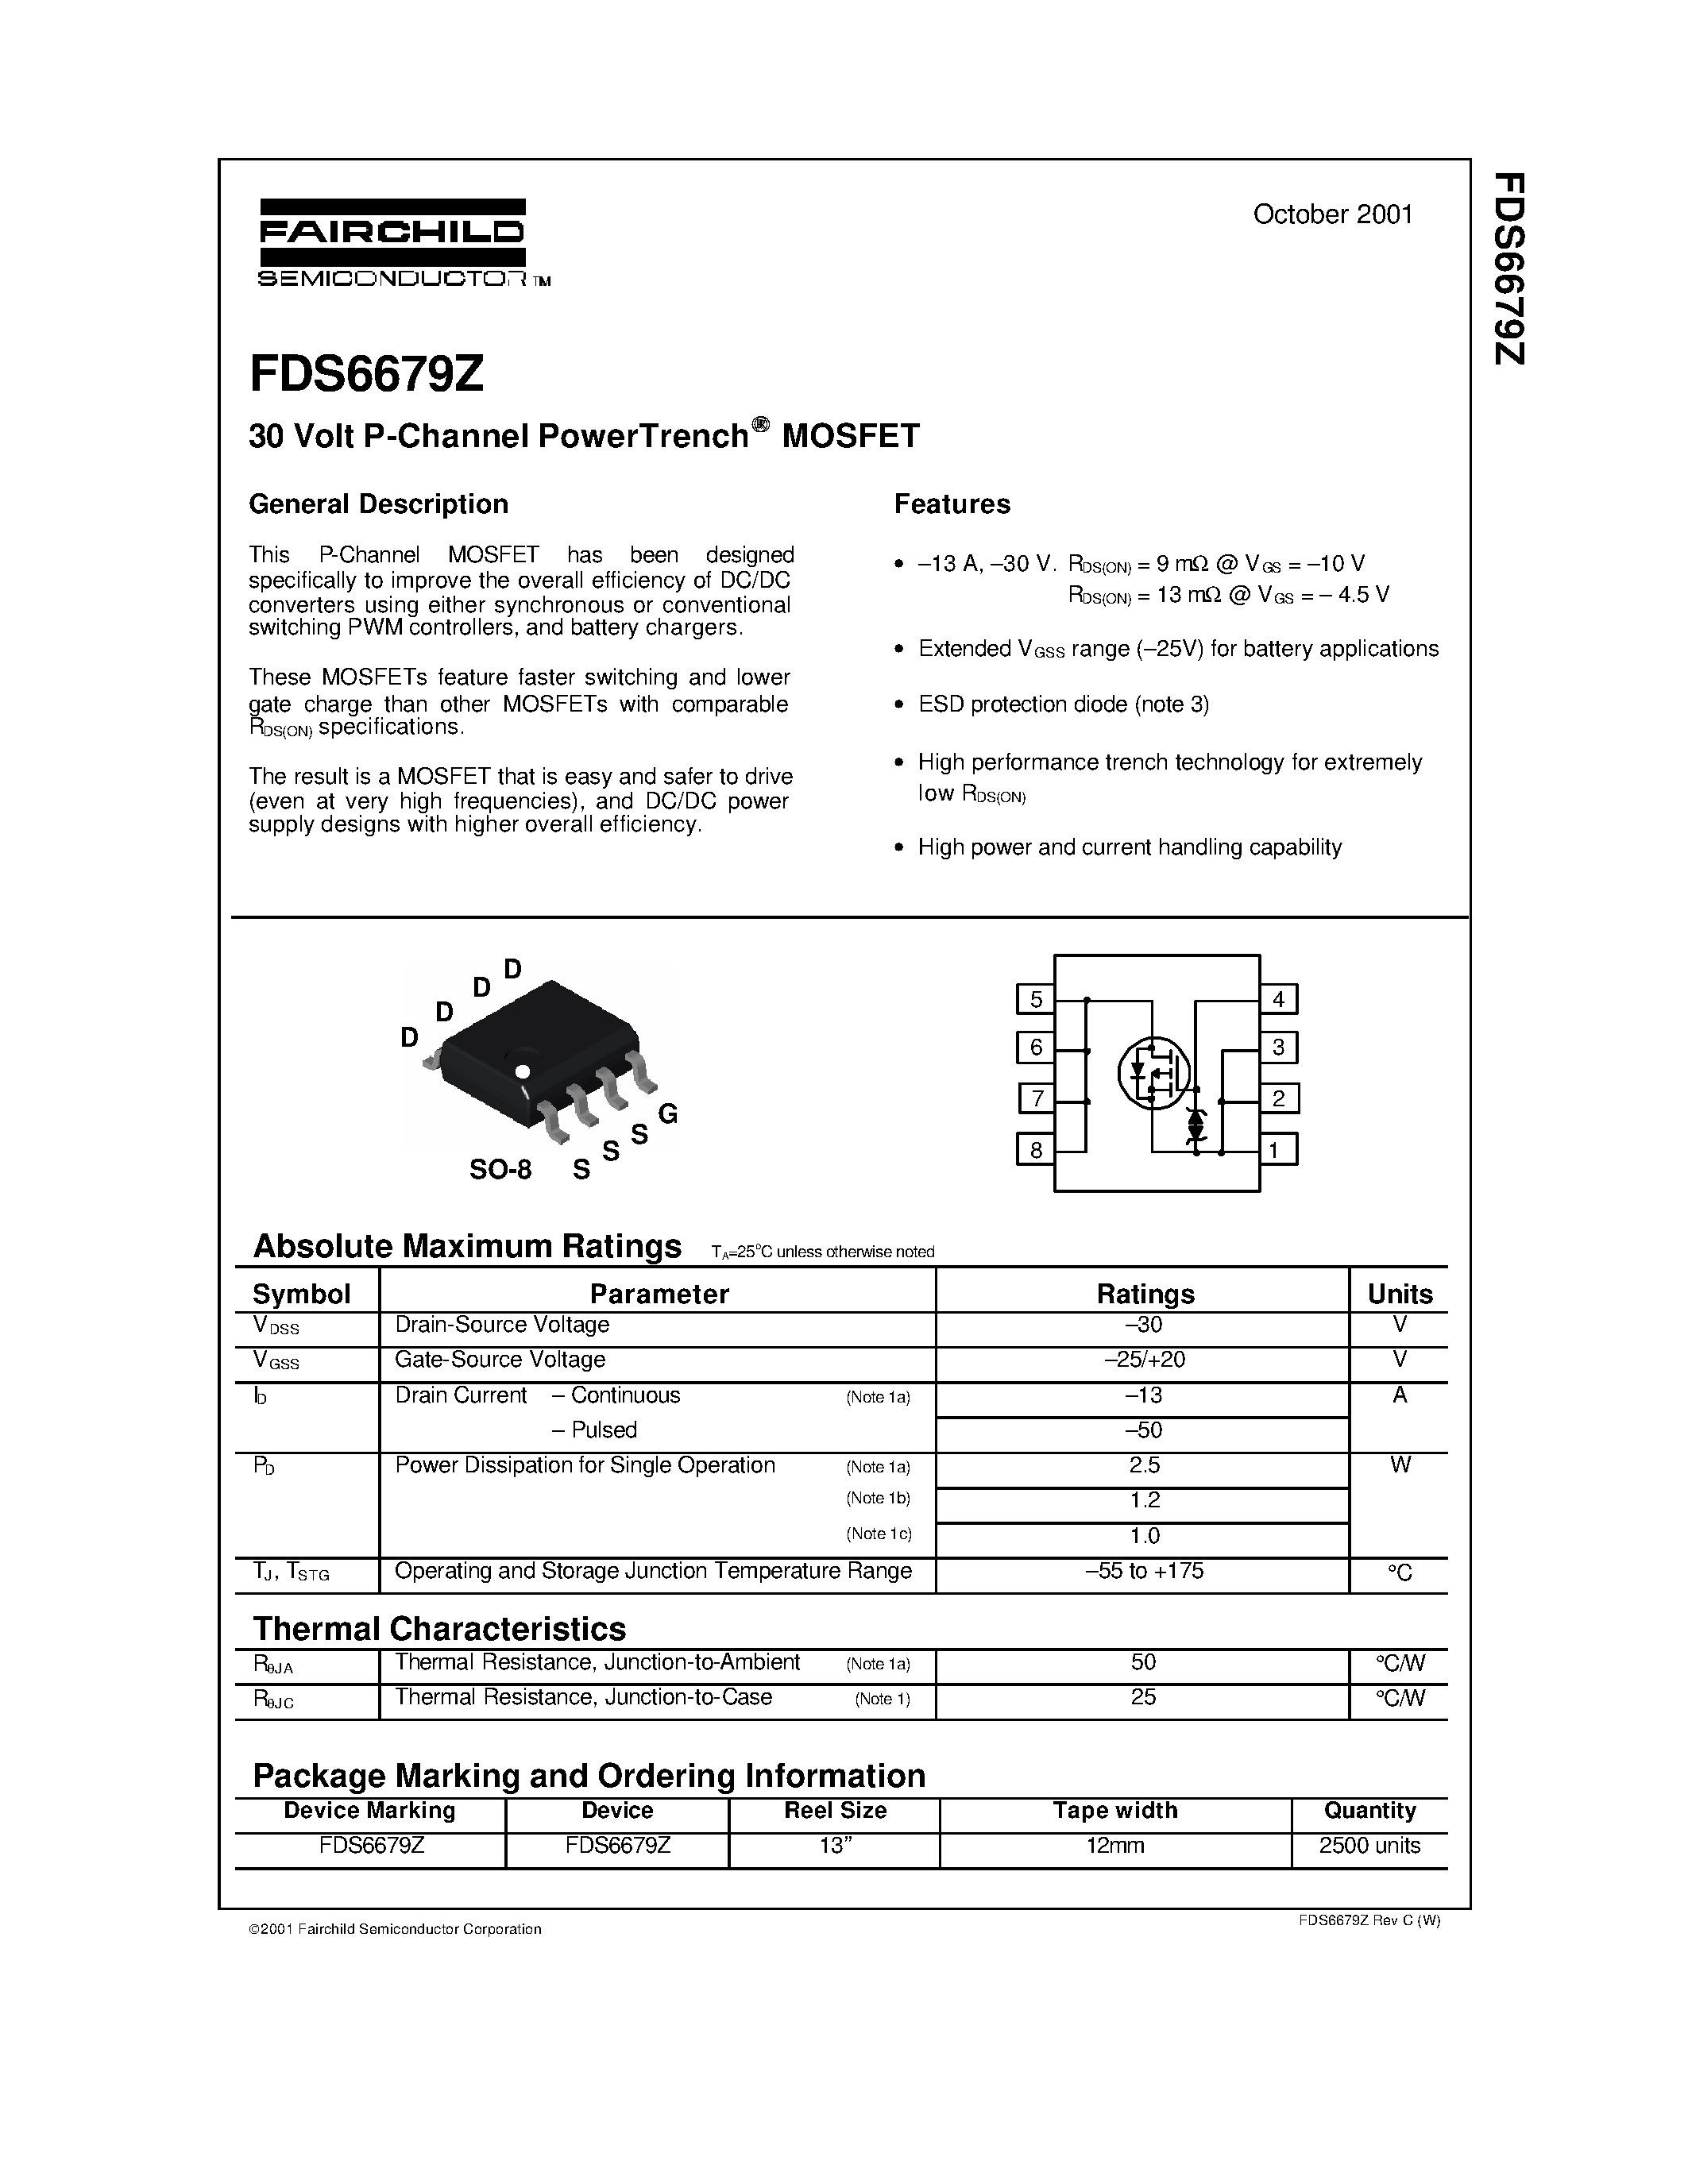 Даташит FDS6679Z - 30 Volt P-Channel PowerTrench MOSFET страница 1